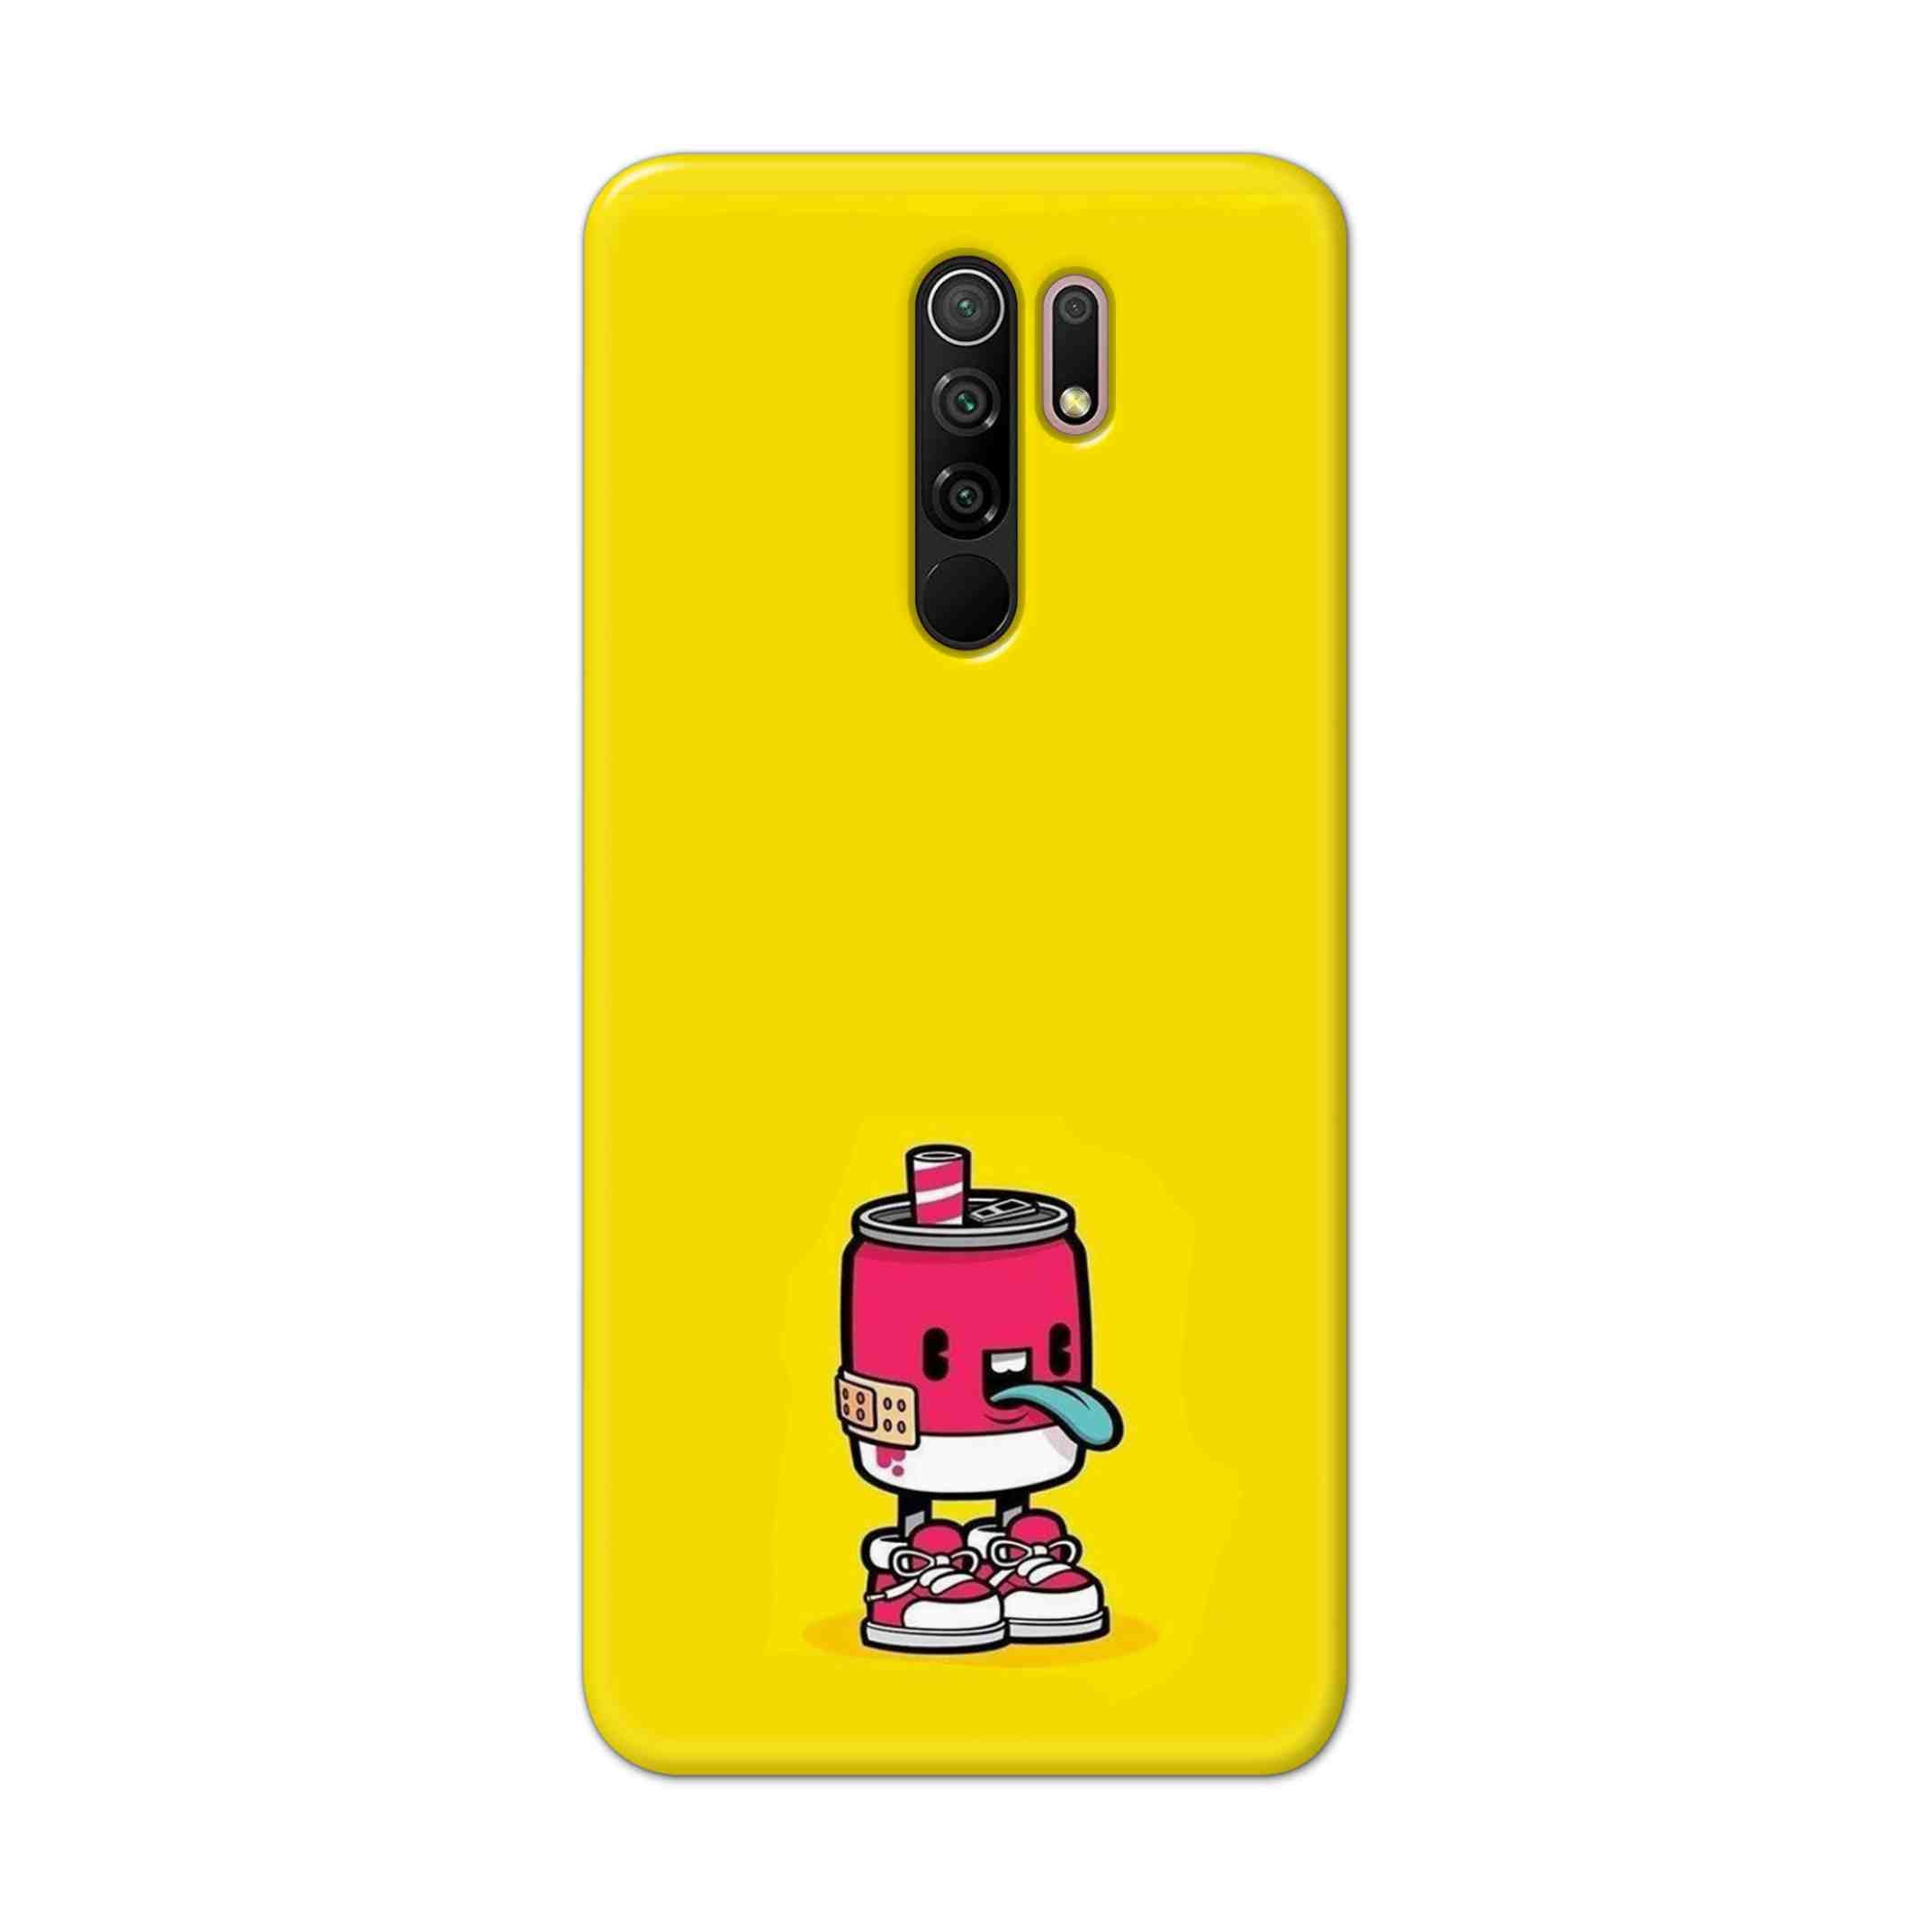 Buy Juice Cane Hard Back Mobile Phone Case Cover For Xiaomi Redmi 9 Prime Online